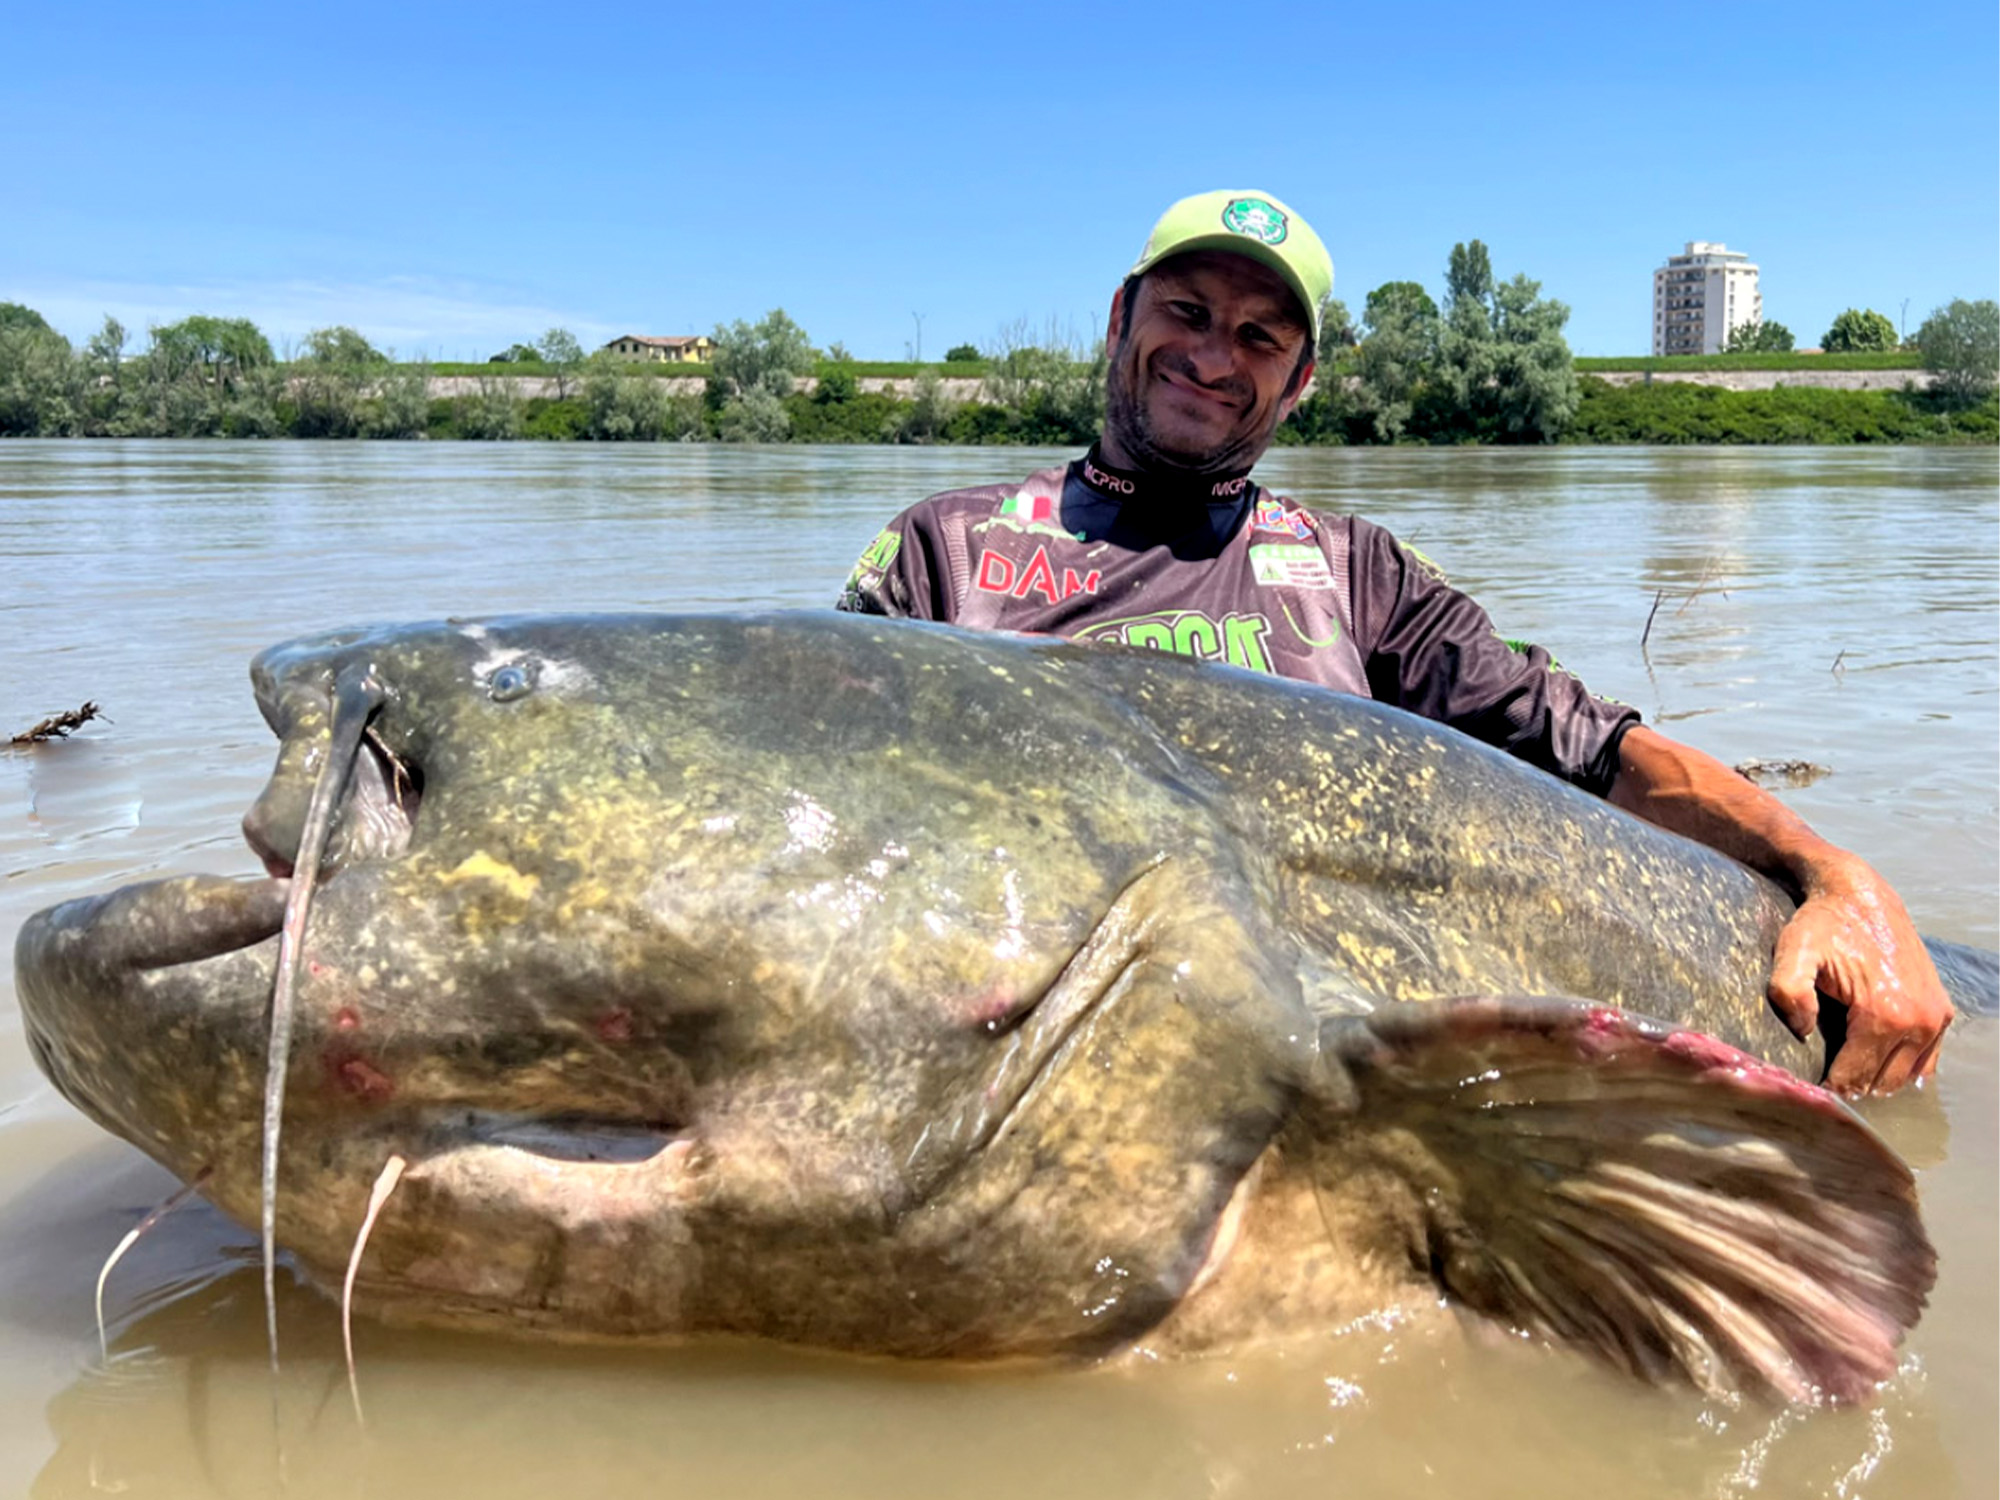 An italian angler with one of the biggest Wels catfish ever caught.